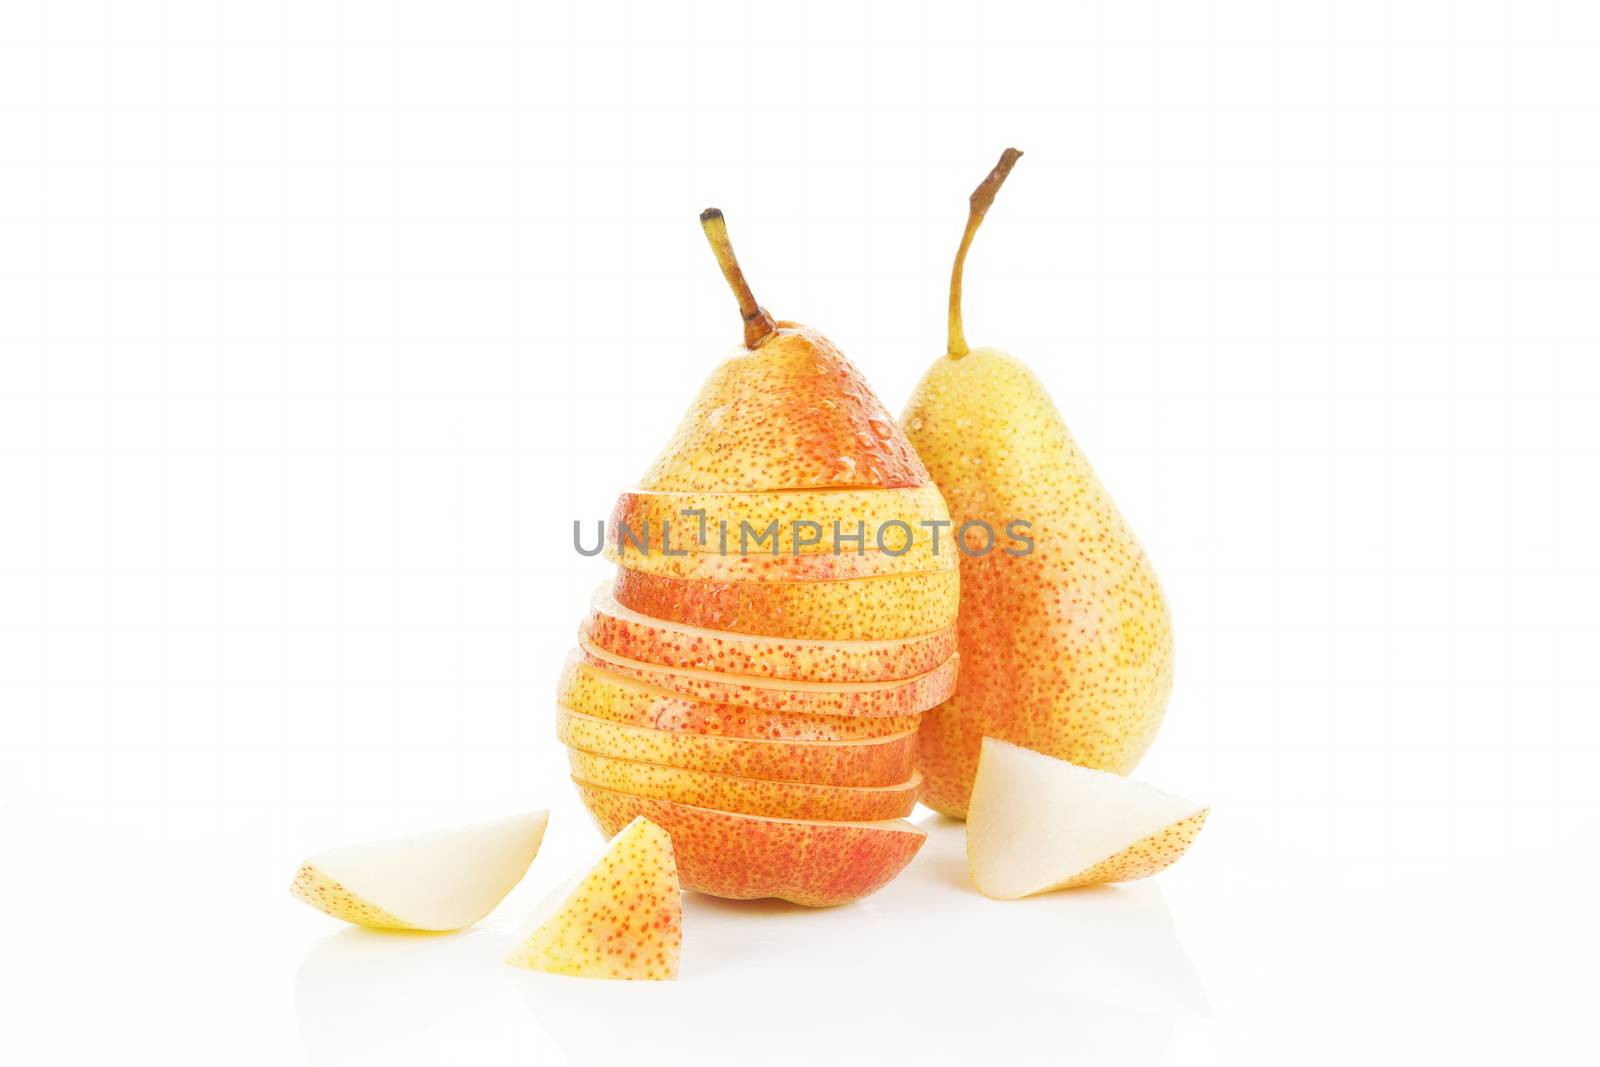 Ripe pear background. Slices, pieces and whole pears isolated on white.